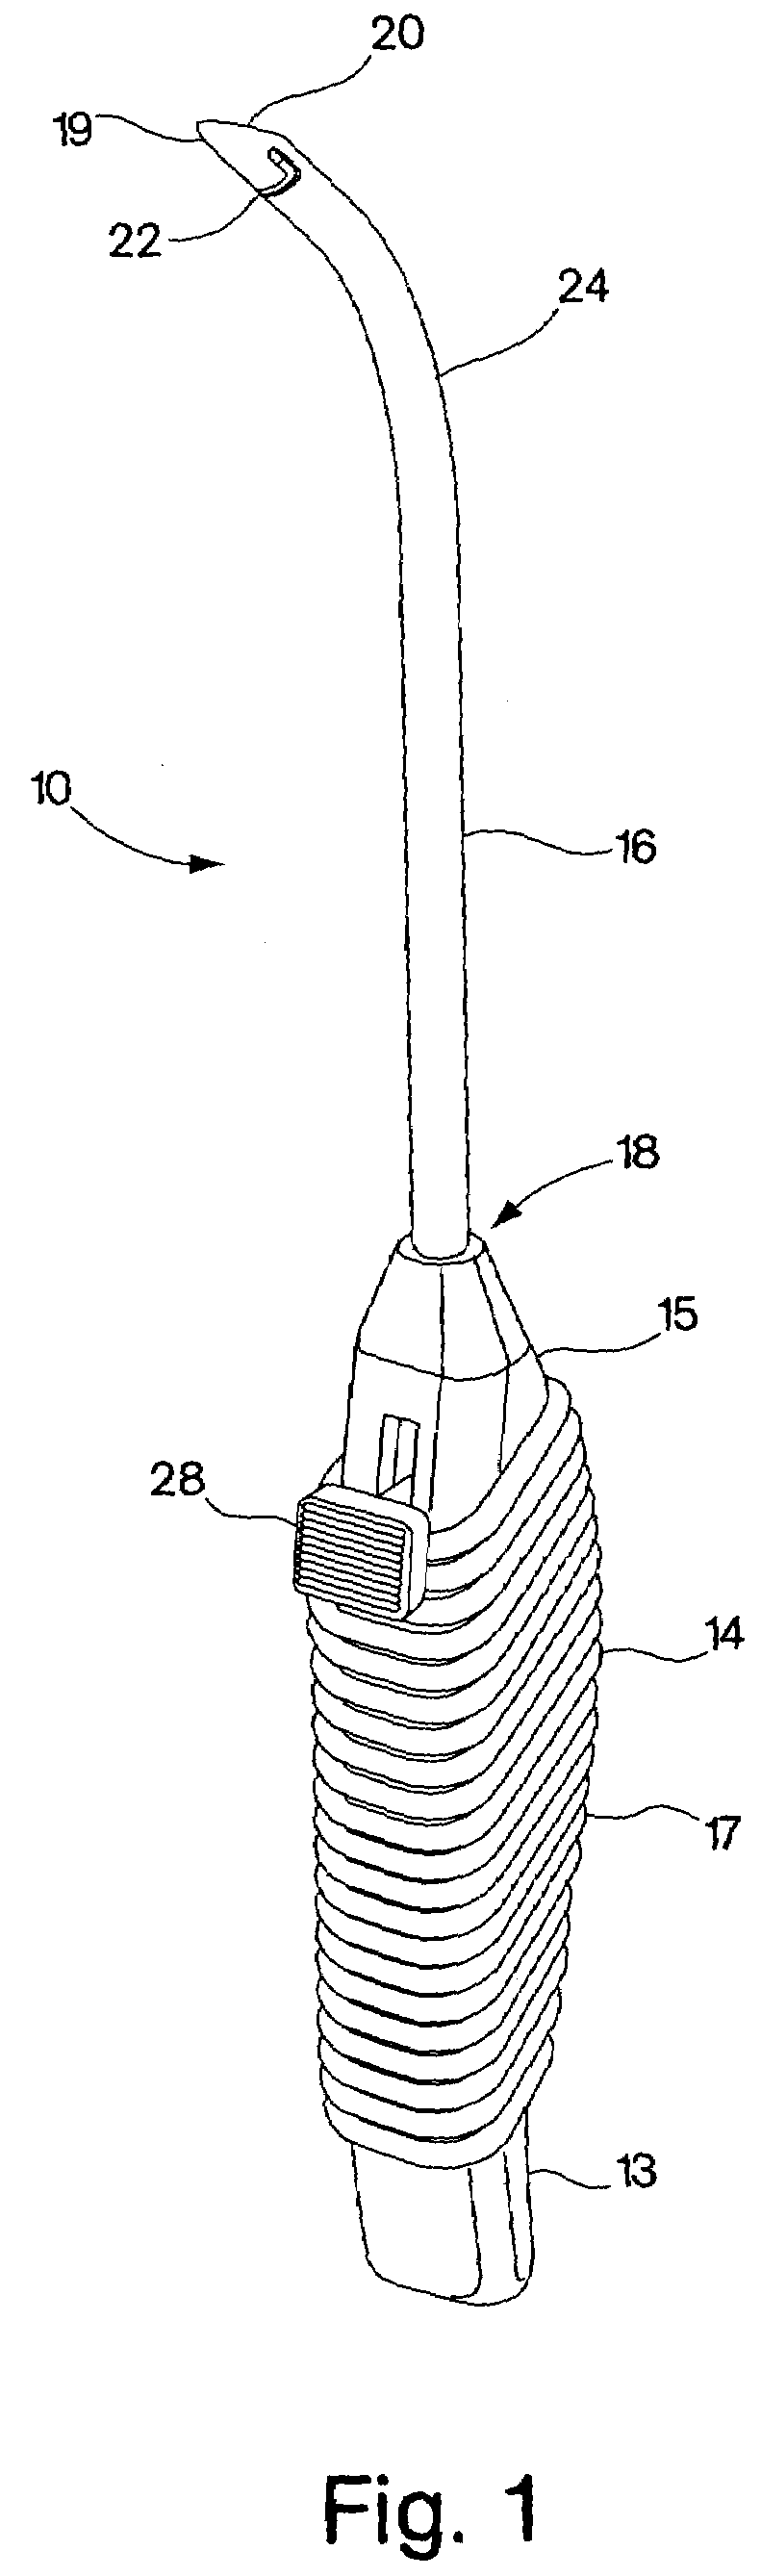 Methods and devices for the treatment of urinary incontinence